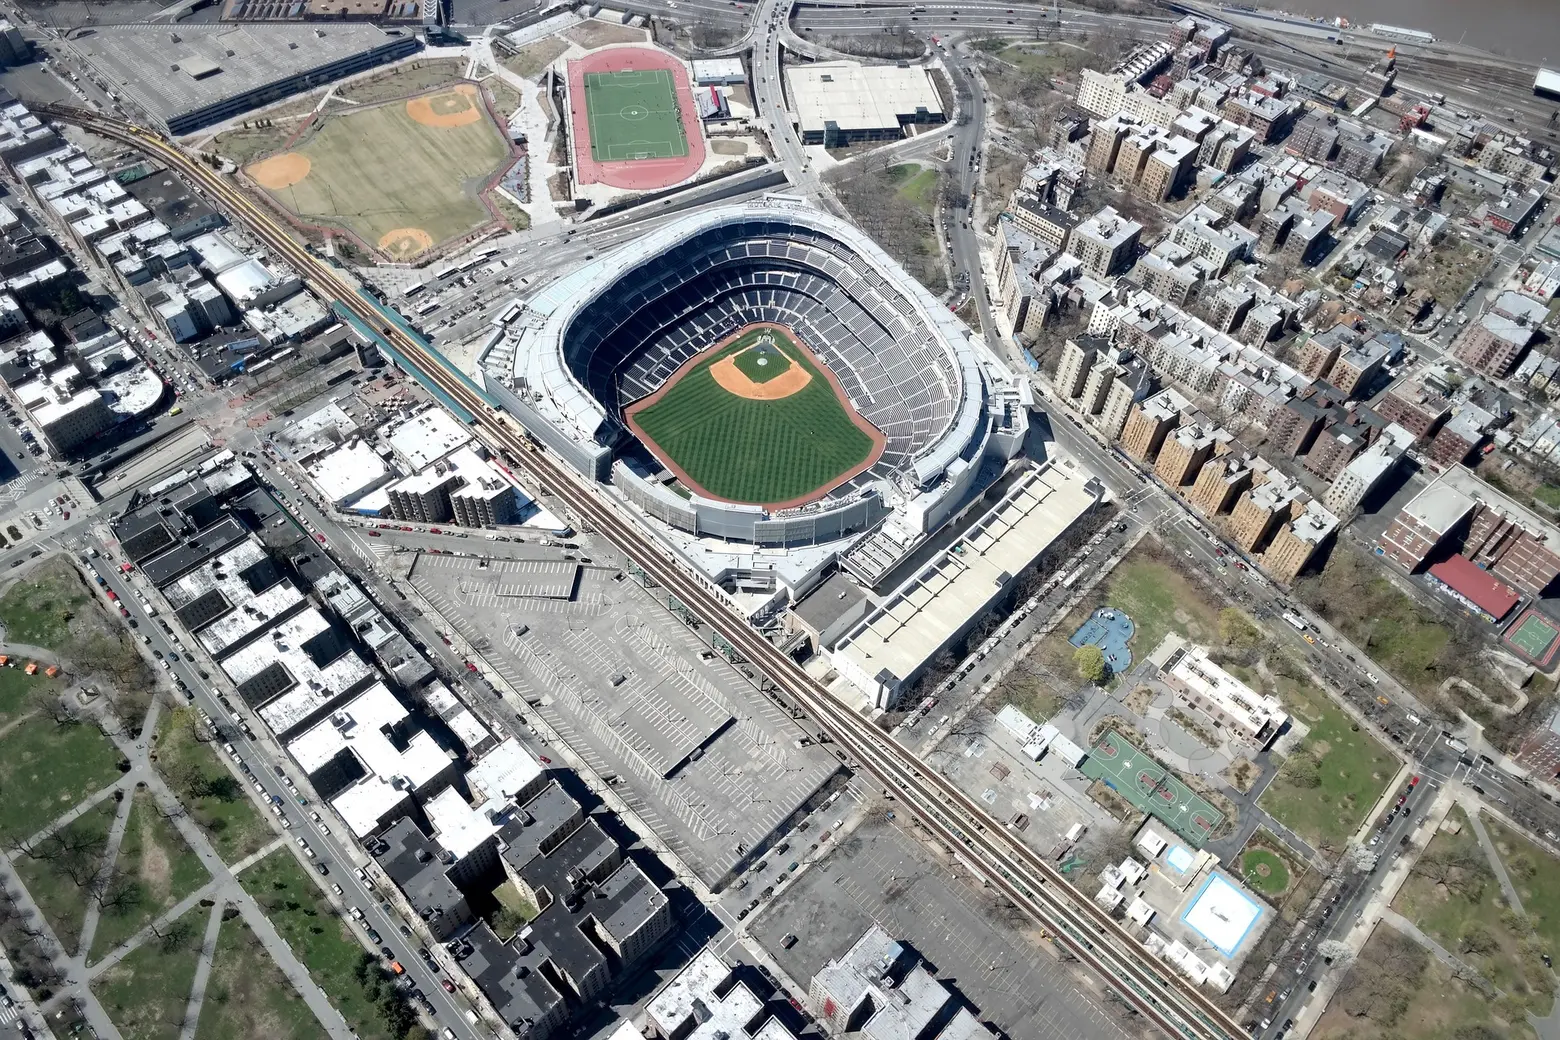 How a new soccer stadium could be a catalyst for neighborhood growth in the South Bronx